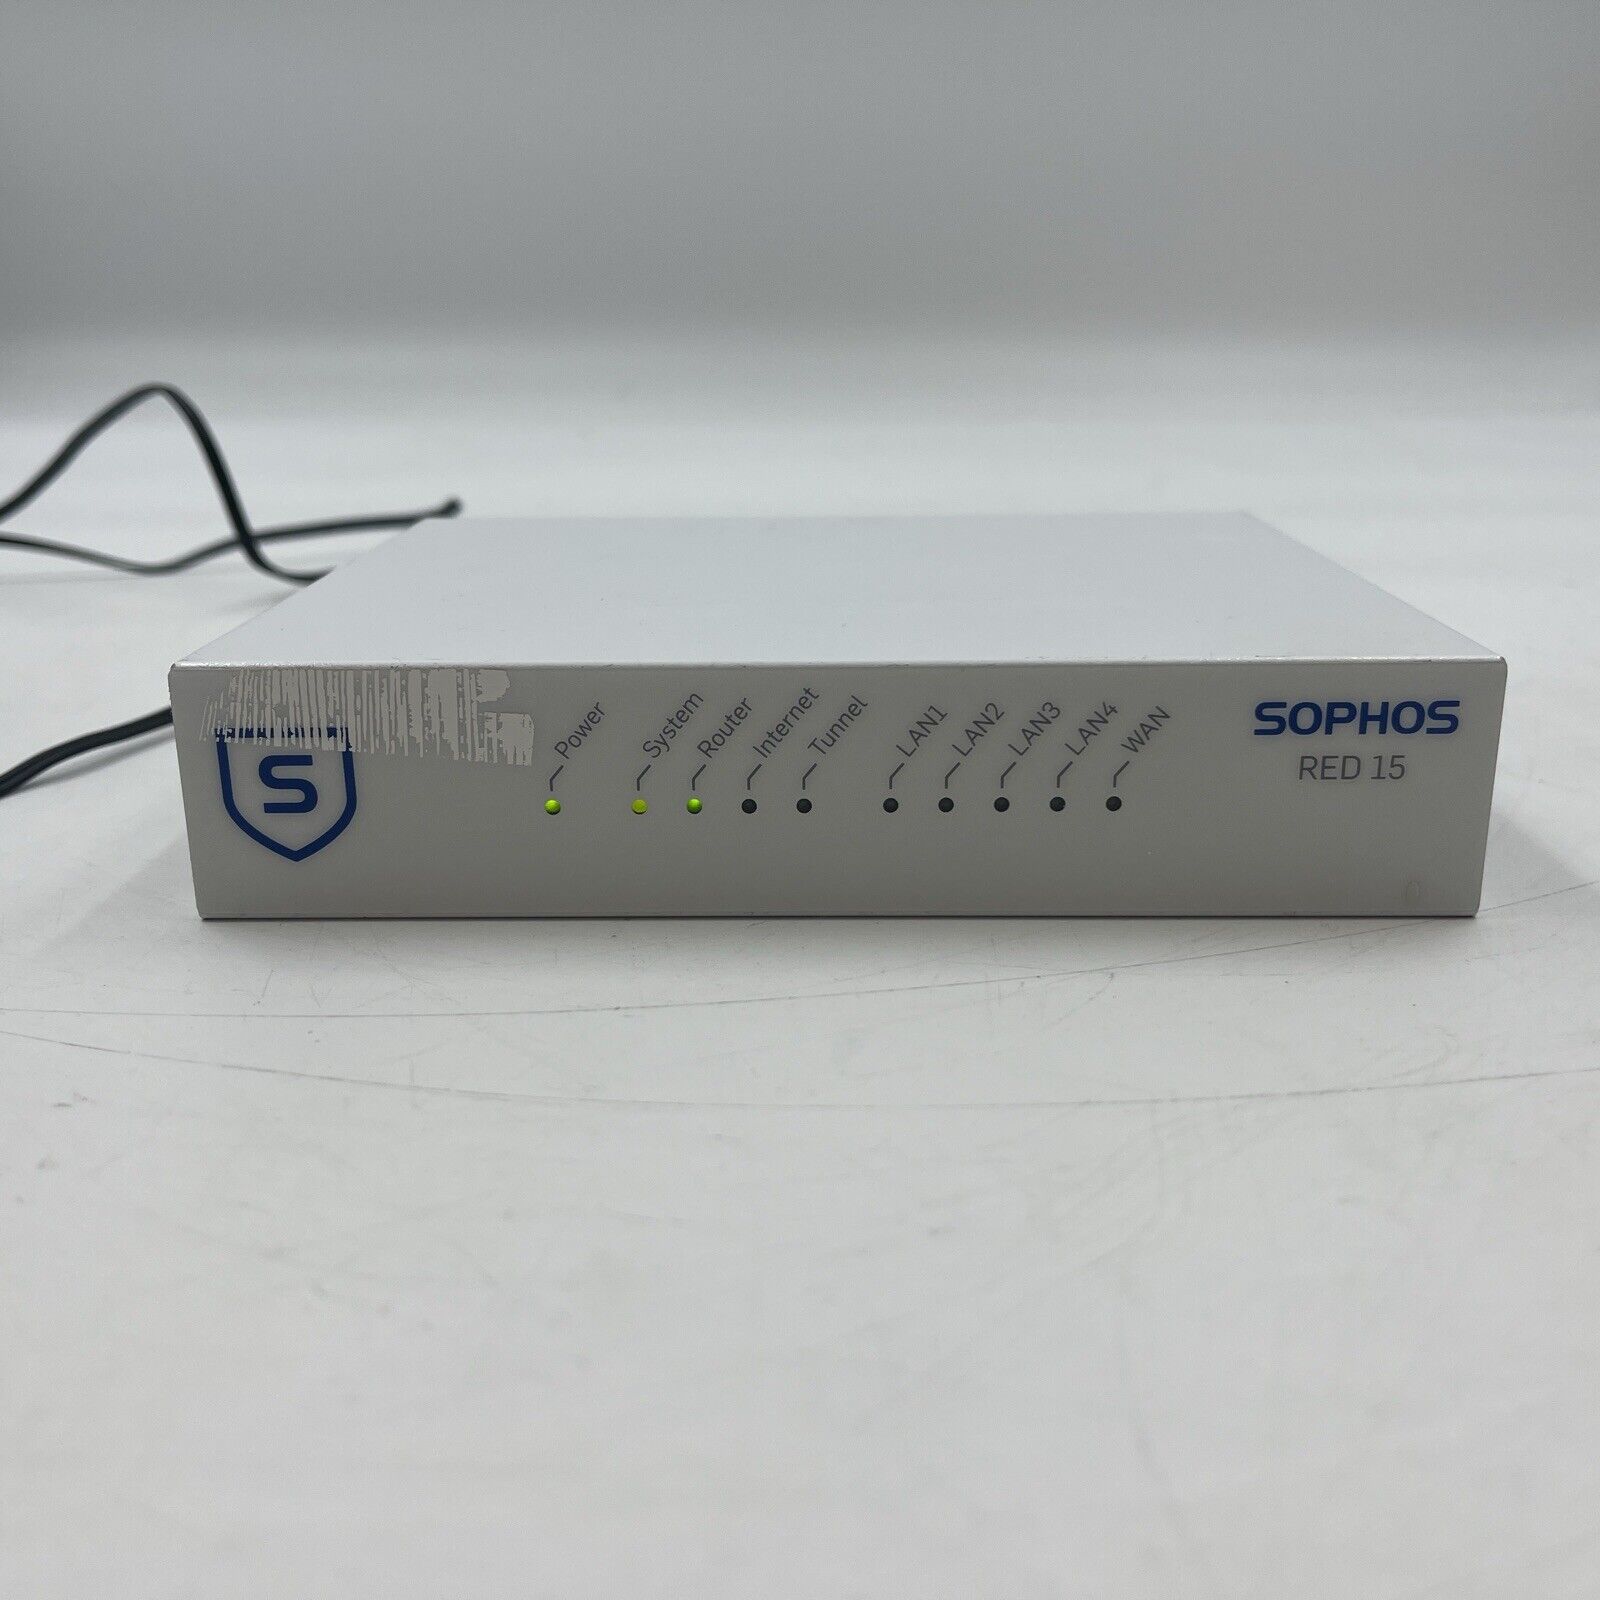 Sophos RED 15 Rev.1 Firewall With Power Adapter. READ #2